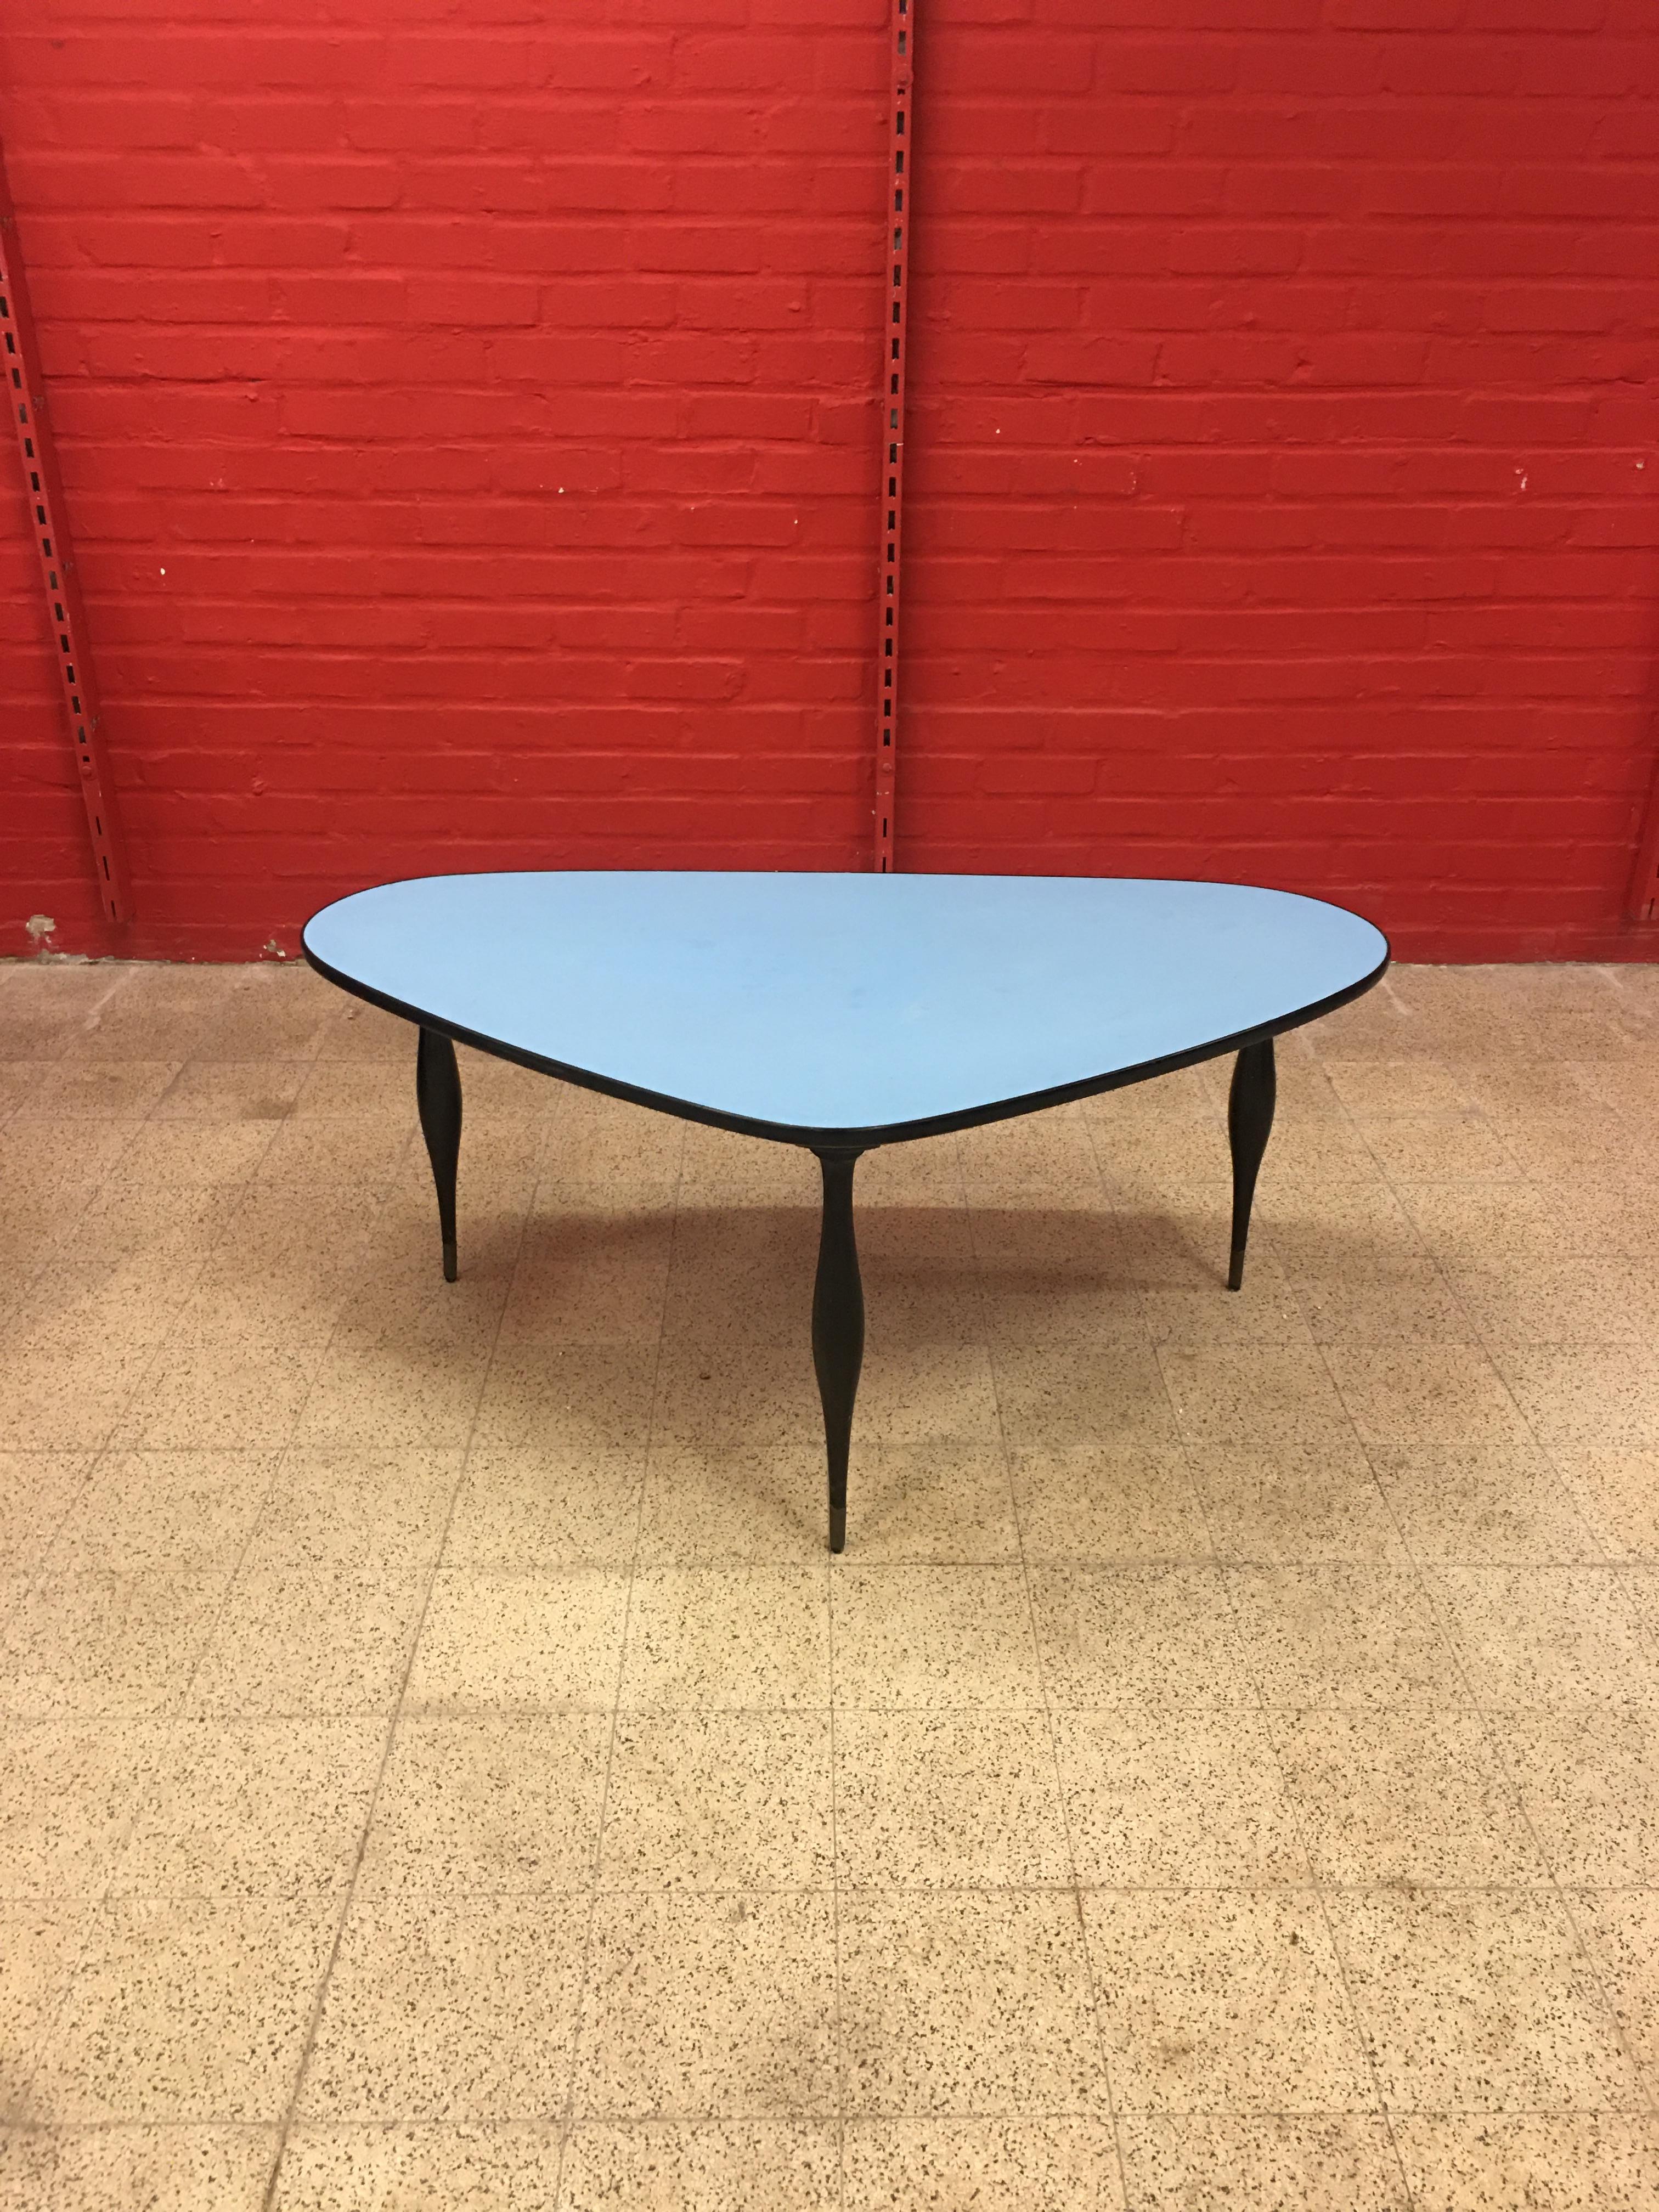 Blackened Original Freeform Coffee Table, Top Covered with Laminate, circa 1960 For Sale